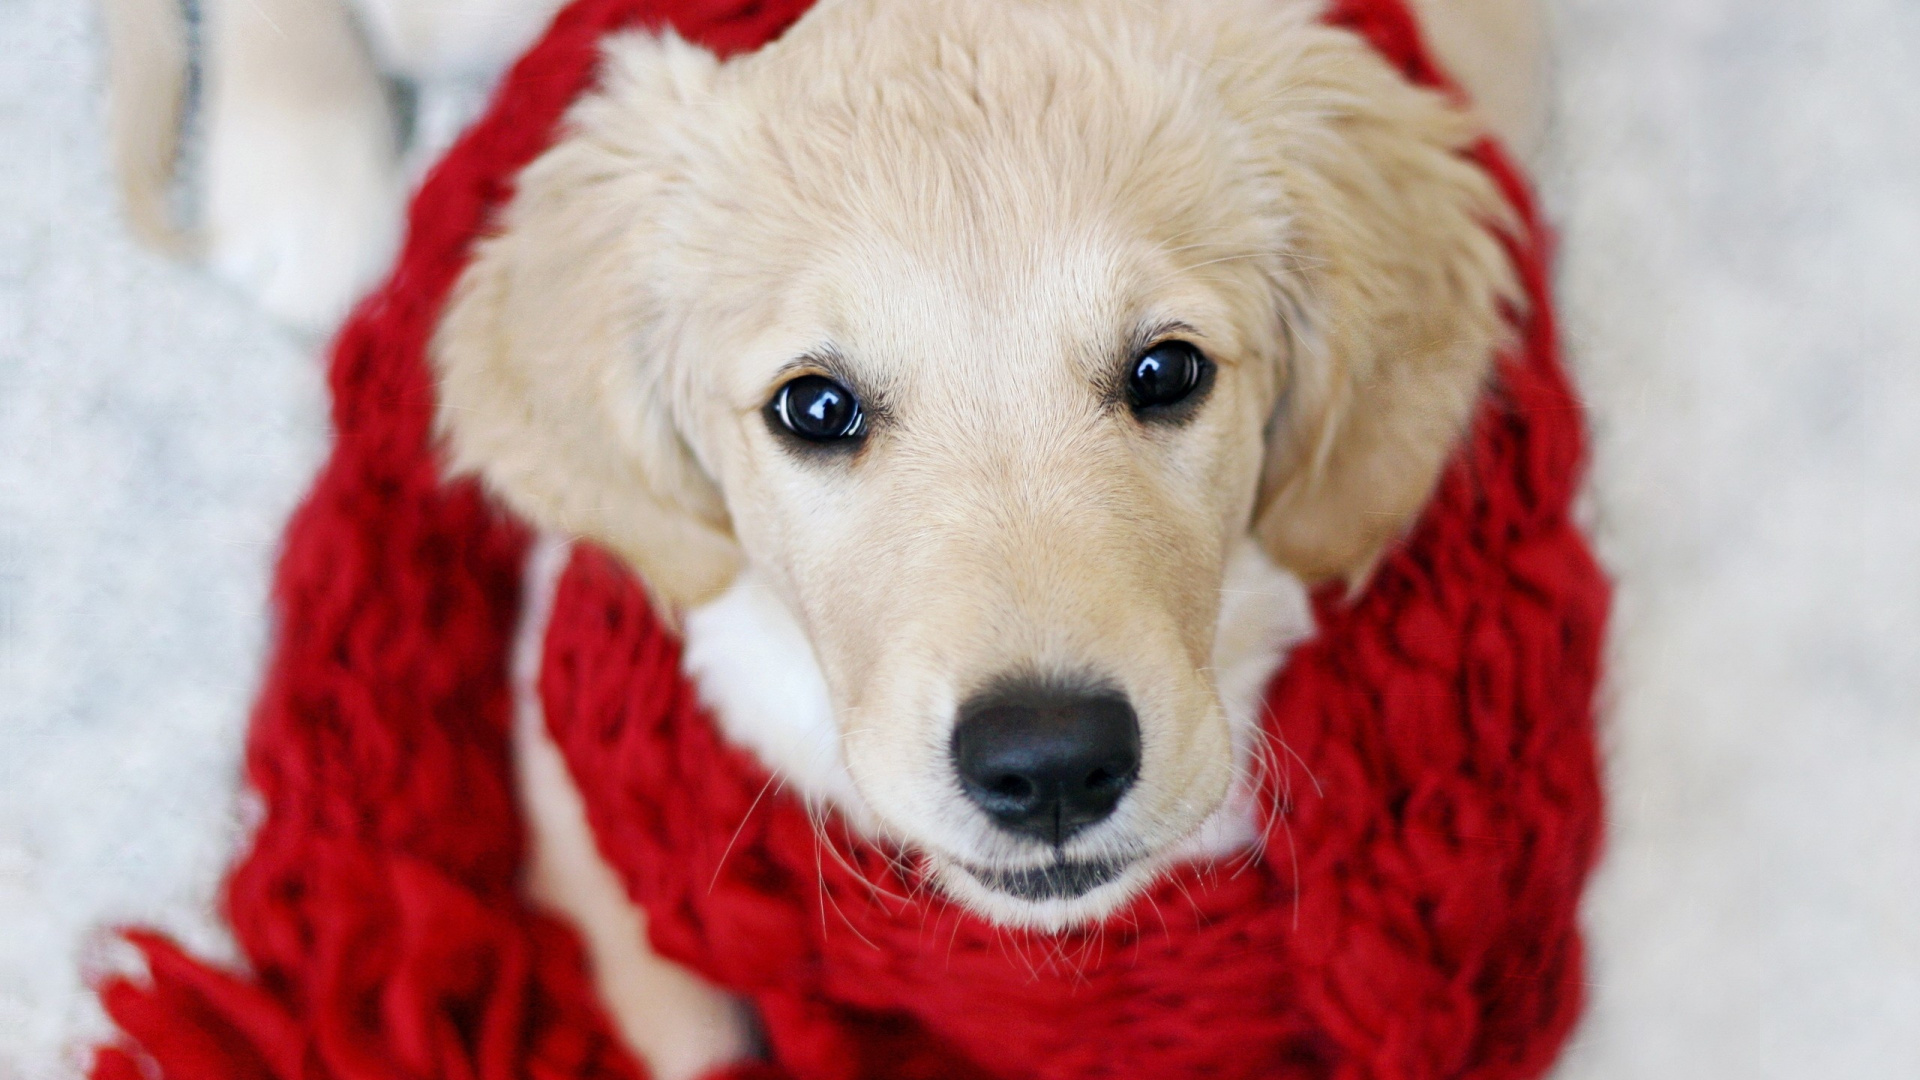 Yellow Labrador Retriever Puppy Covered With Red Blanket. Wallpaper in 1920x1080 Resolution